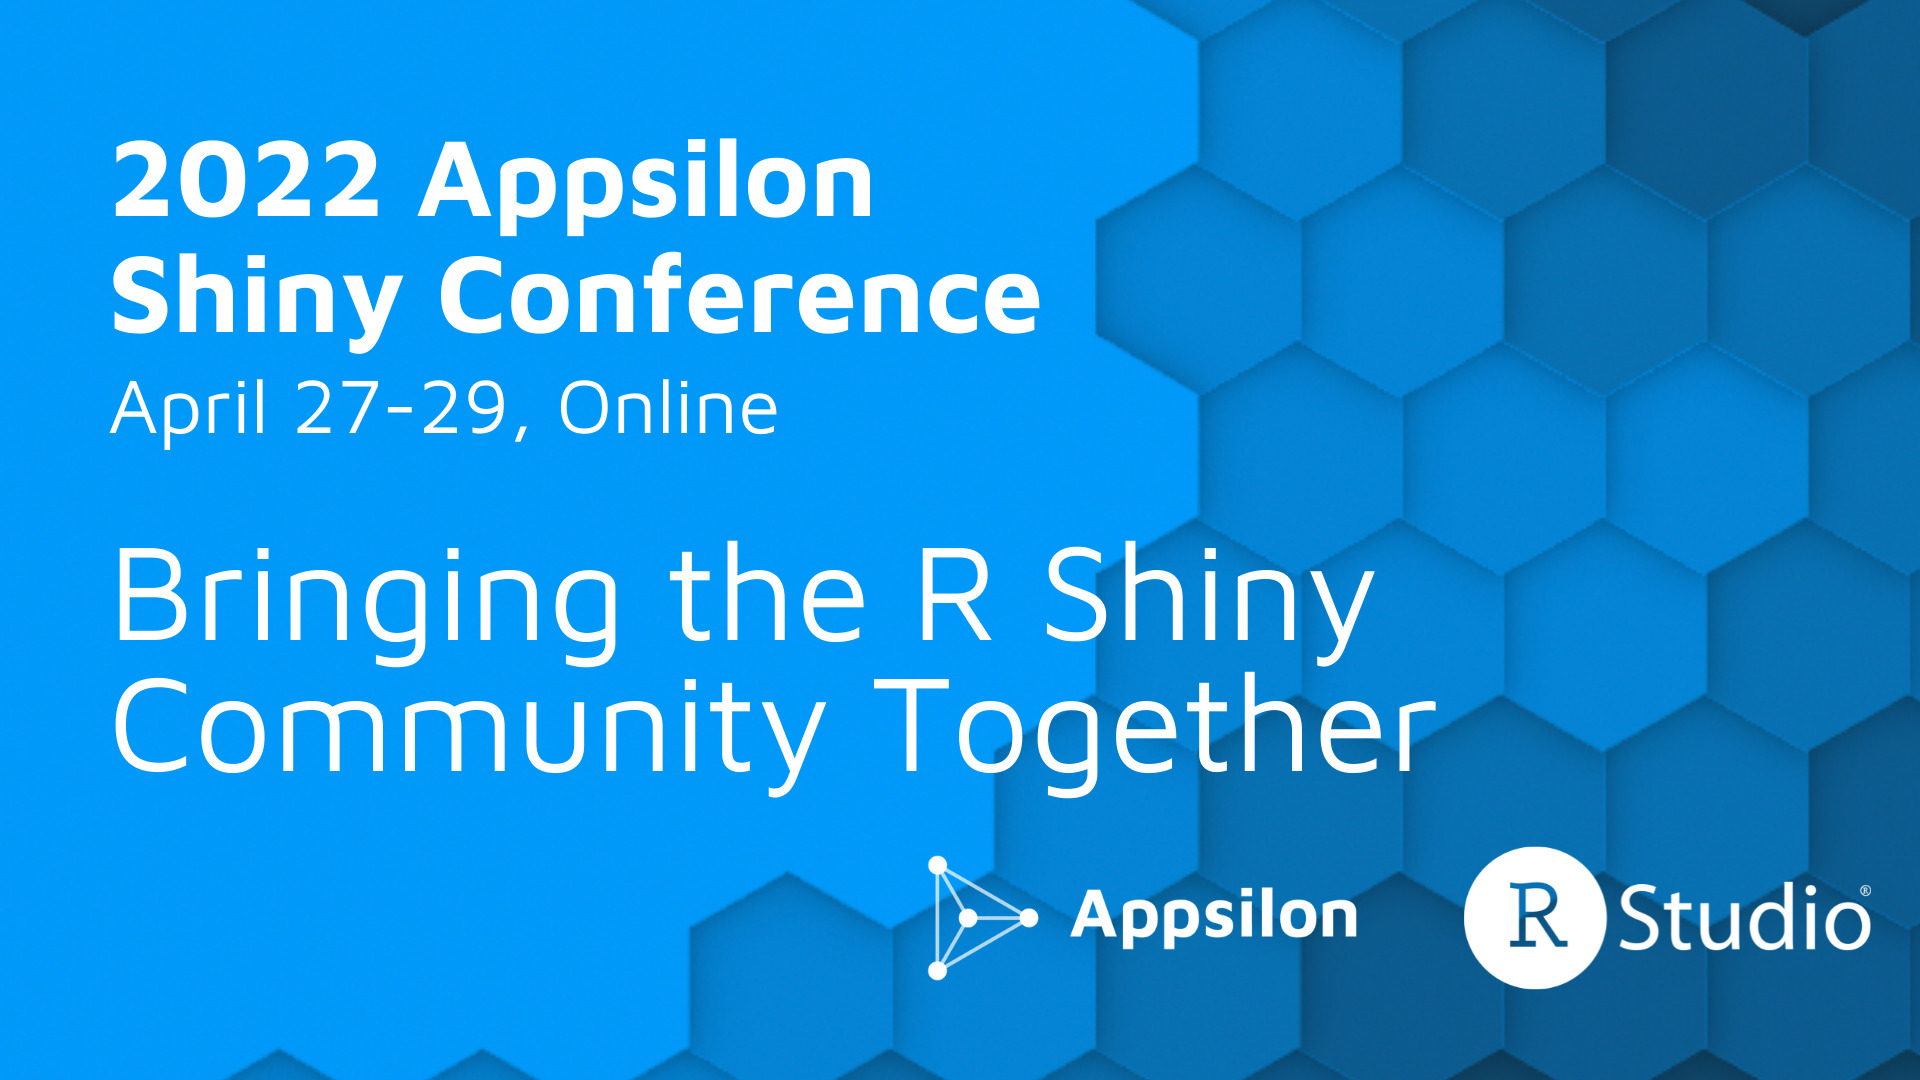 Logo for the Appsilon Shiny Conference that say 2022 Appsilon Shiny Conference April 27 through 29 online, bringing the Shiny community together, with the Appsilon and RStudio logo and a blue background with hexagons